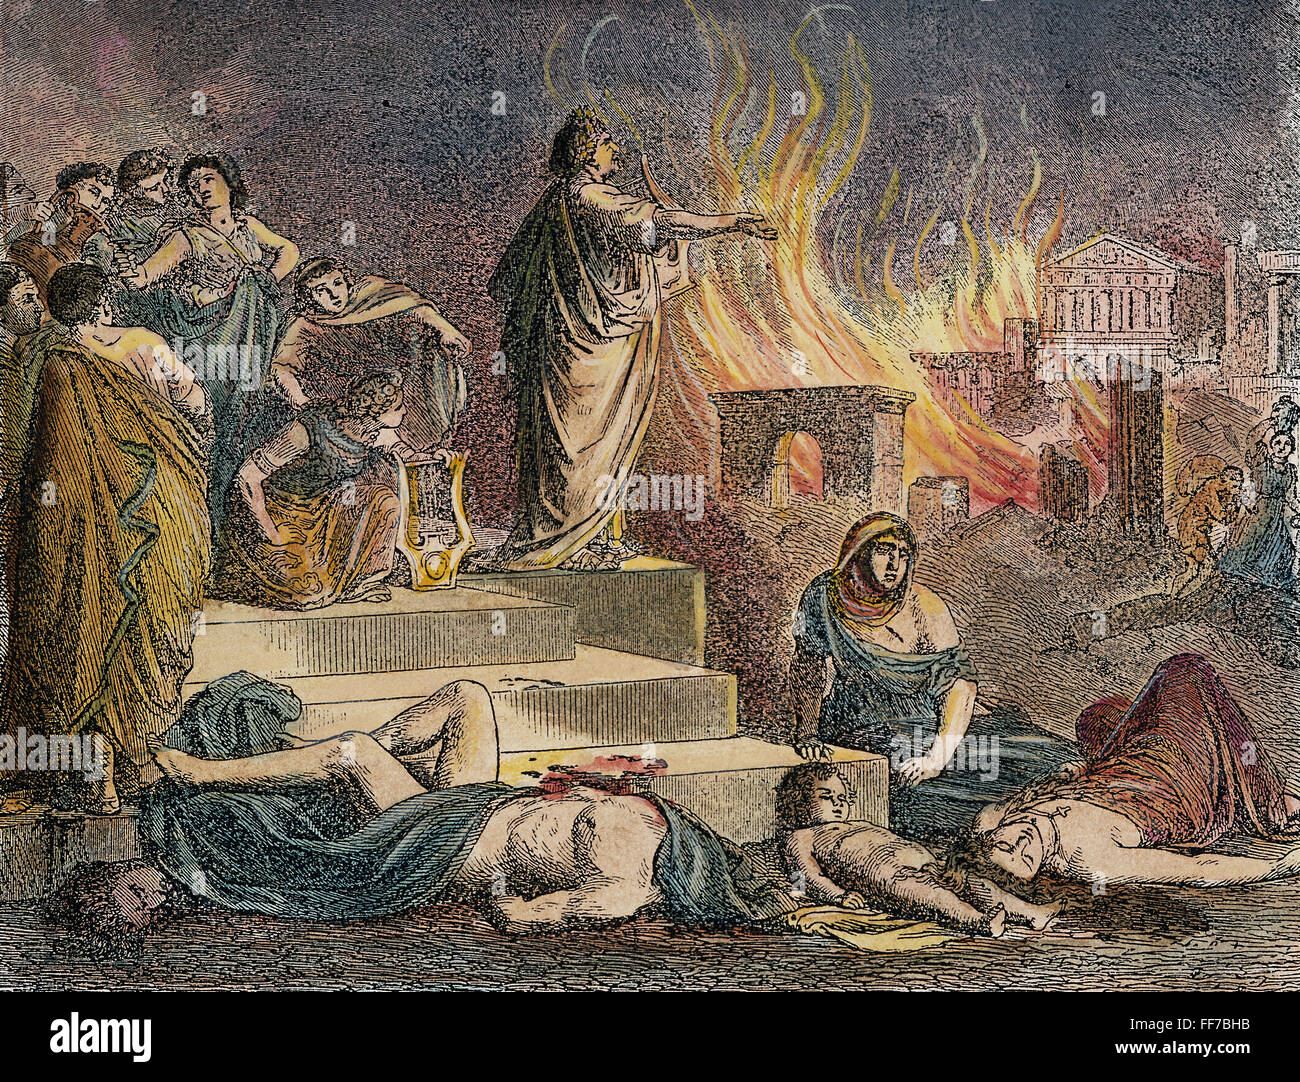 NERO PLAYING LYRE, 64 A.D. /nNero playing his lyre at the burning of Rome in 64 A.D. Engraving, 18th century. Stock Photo